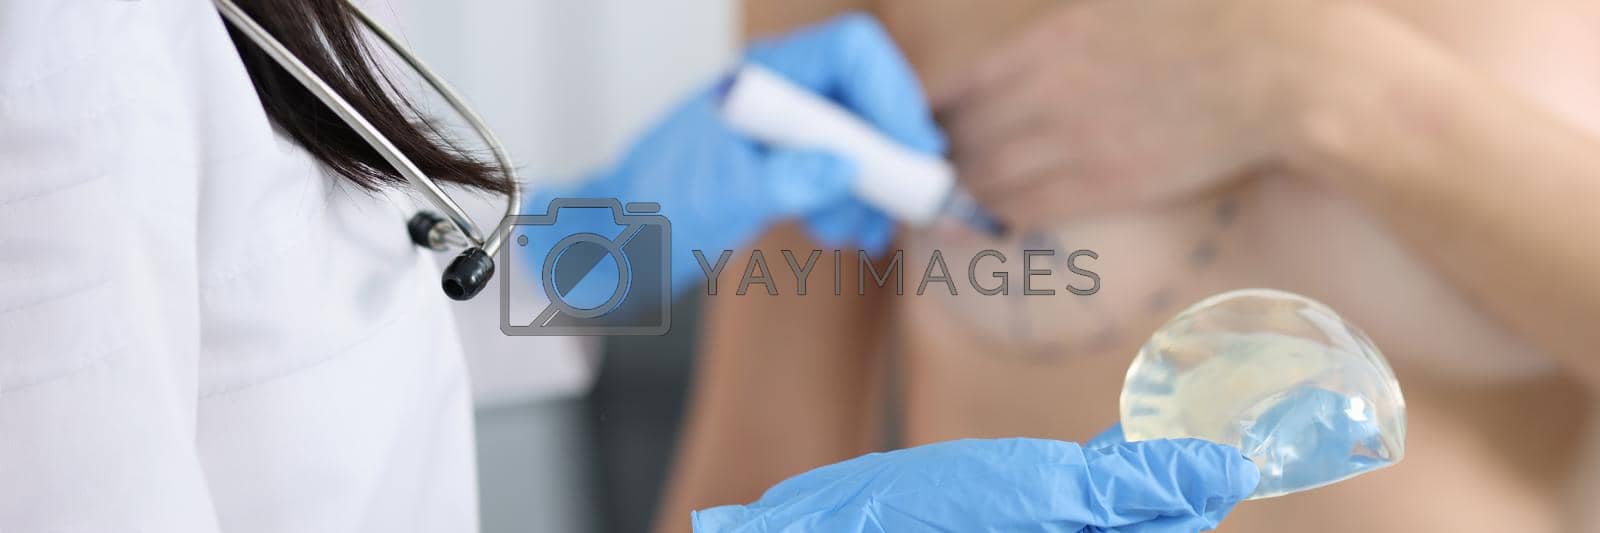 Royalty free image of Plastic surgeon holding silicone breast implant and applying preoperative markings to patient chest closeup by kuprevich